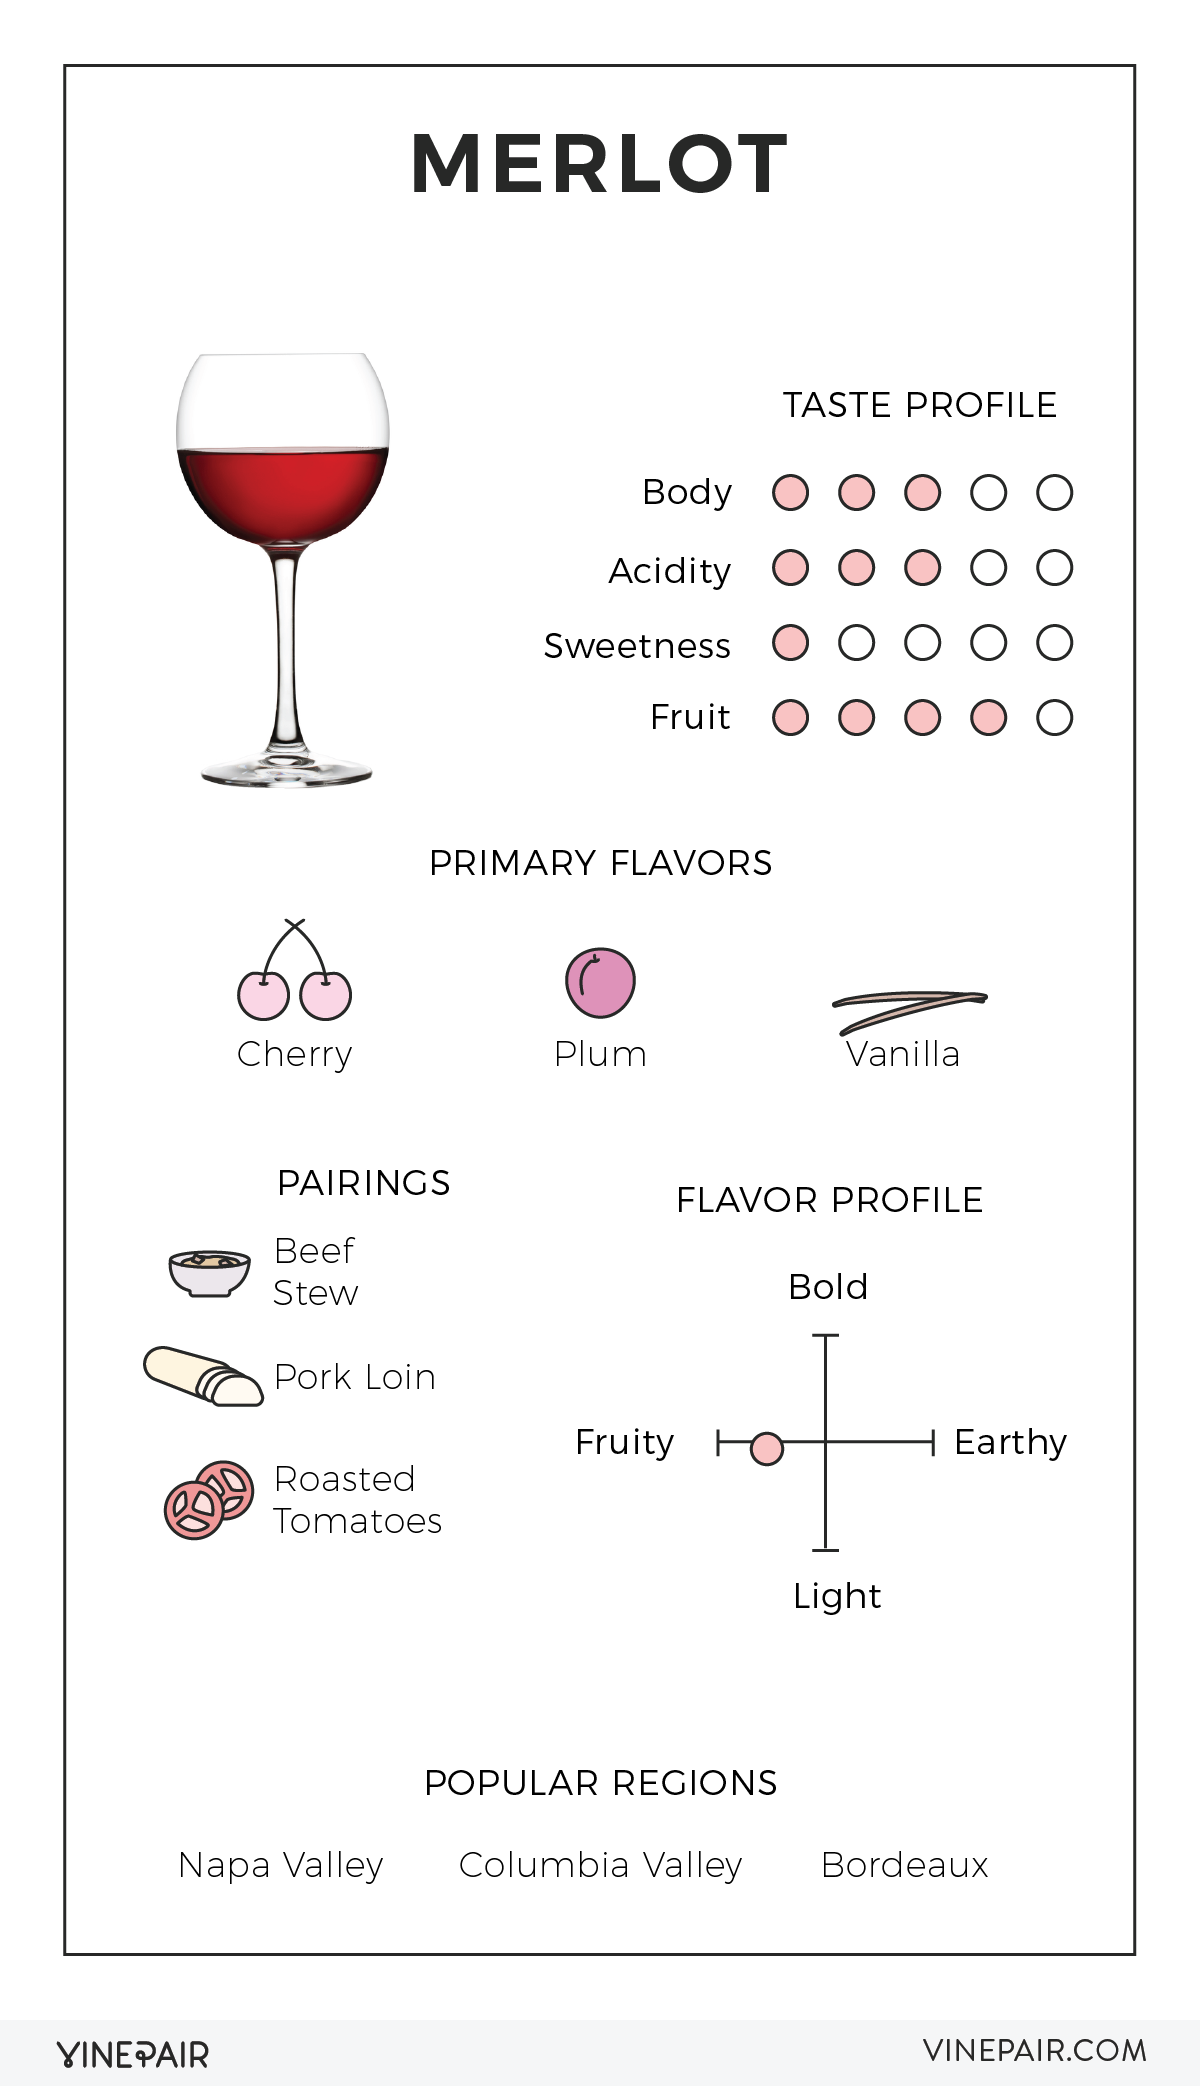 An Illustrated Guide to Merlot